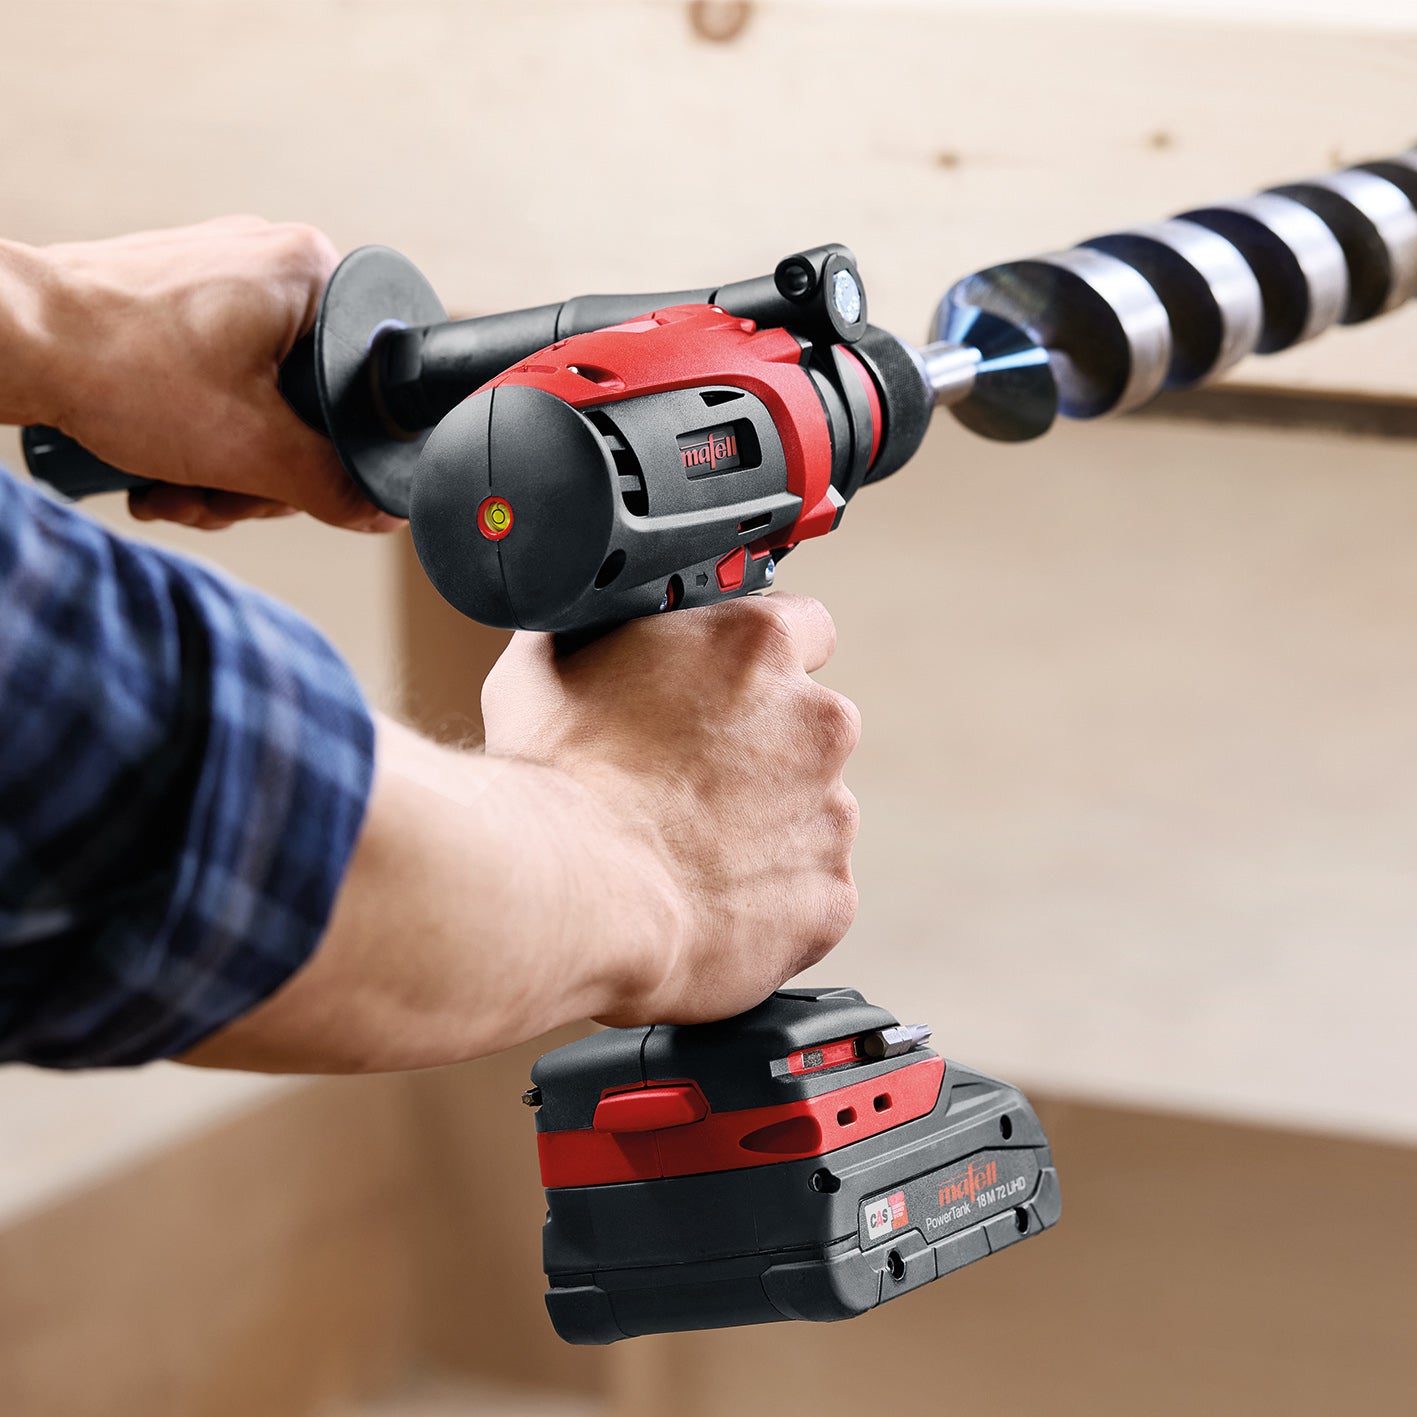 A18Mbl Midi 18v Drill driver c/w 1 x 5.5Ah & 1 x 4.0Ah Li Batts & Charger